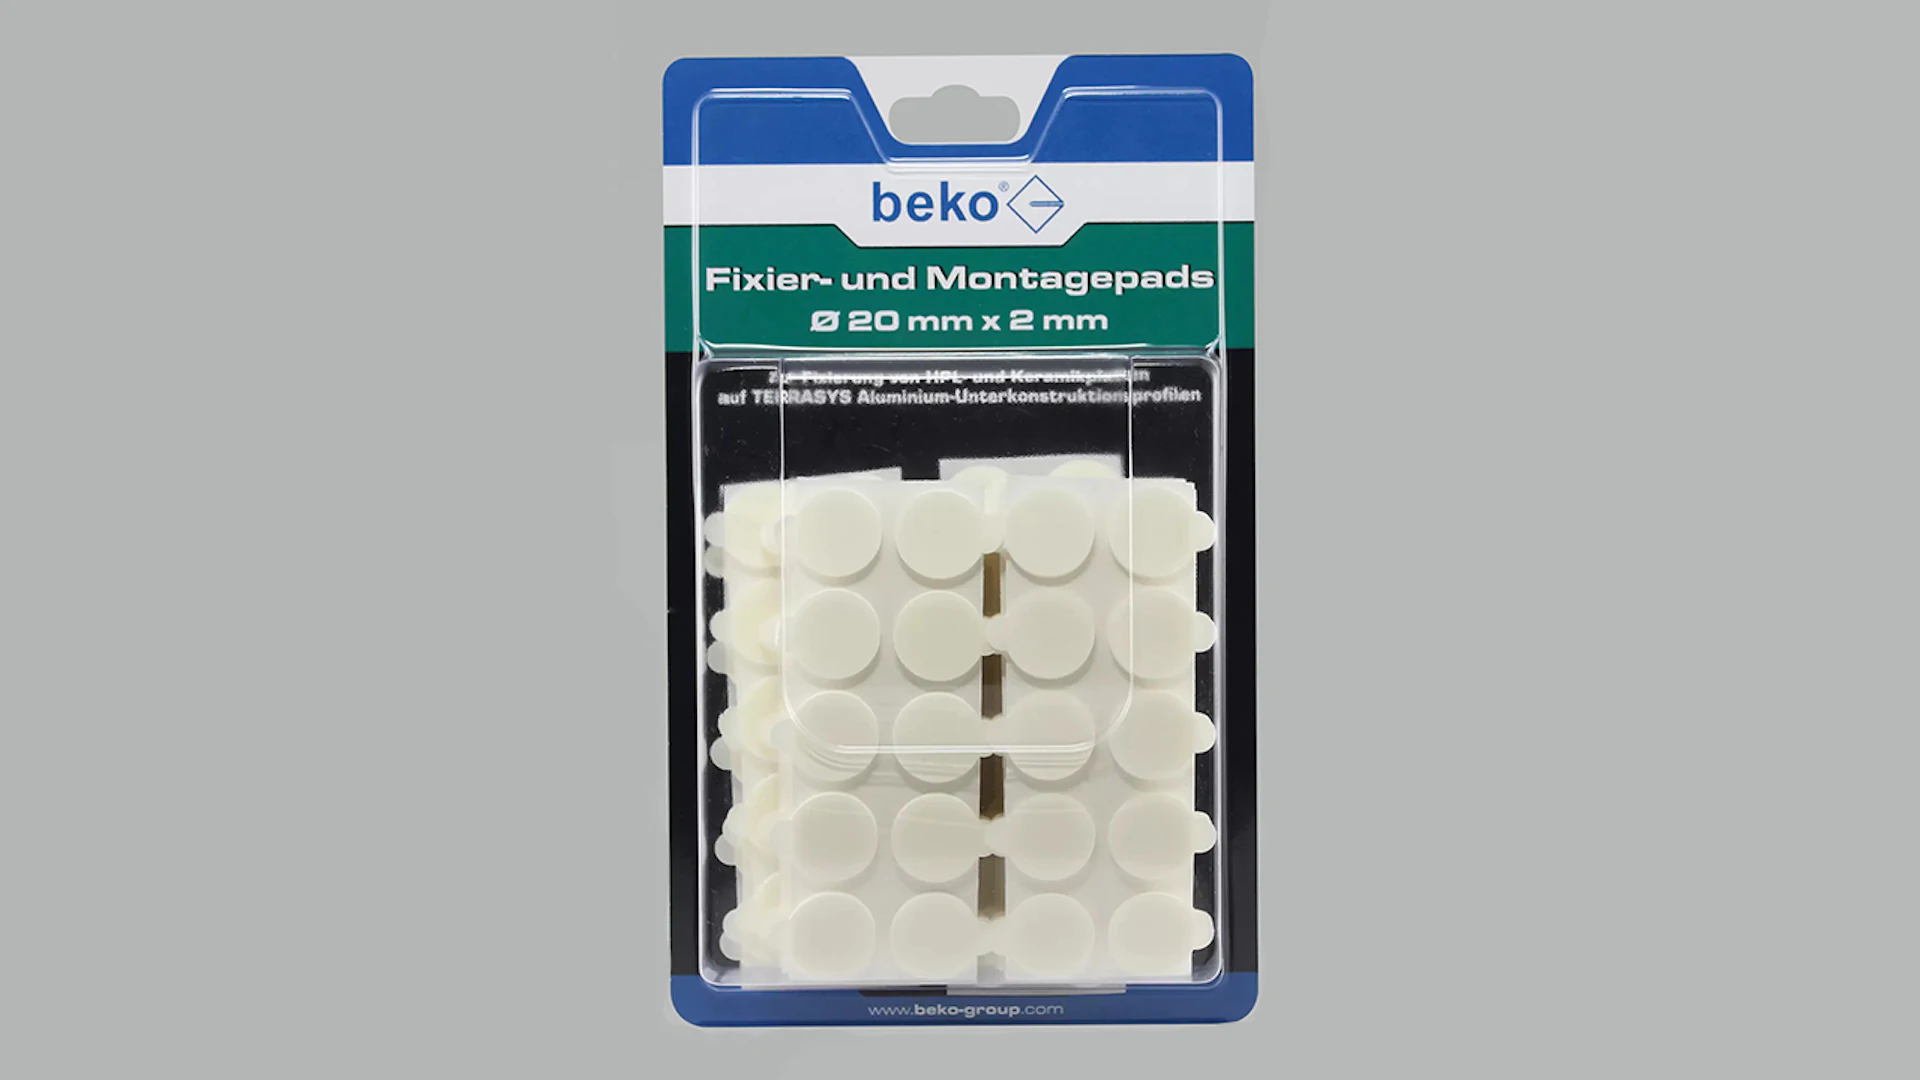 Beko fixing and mounting pads for HPL planks Ø 20 mm x 2 mm